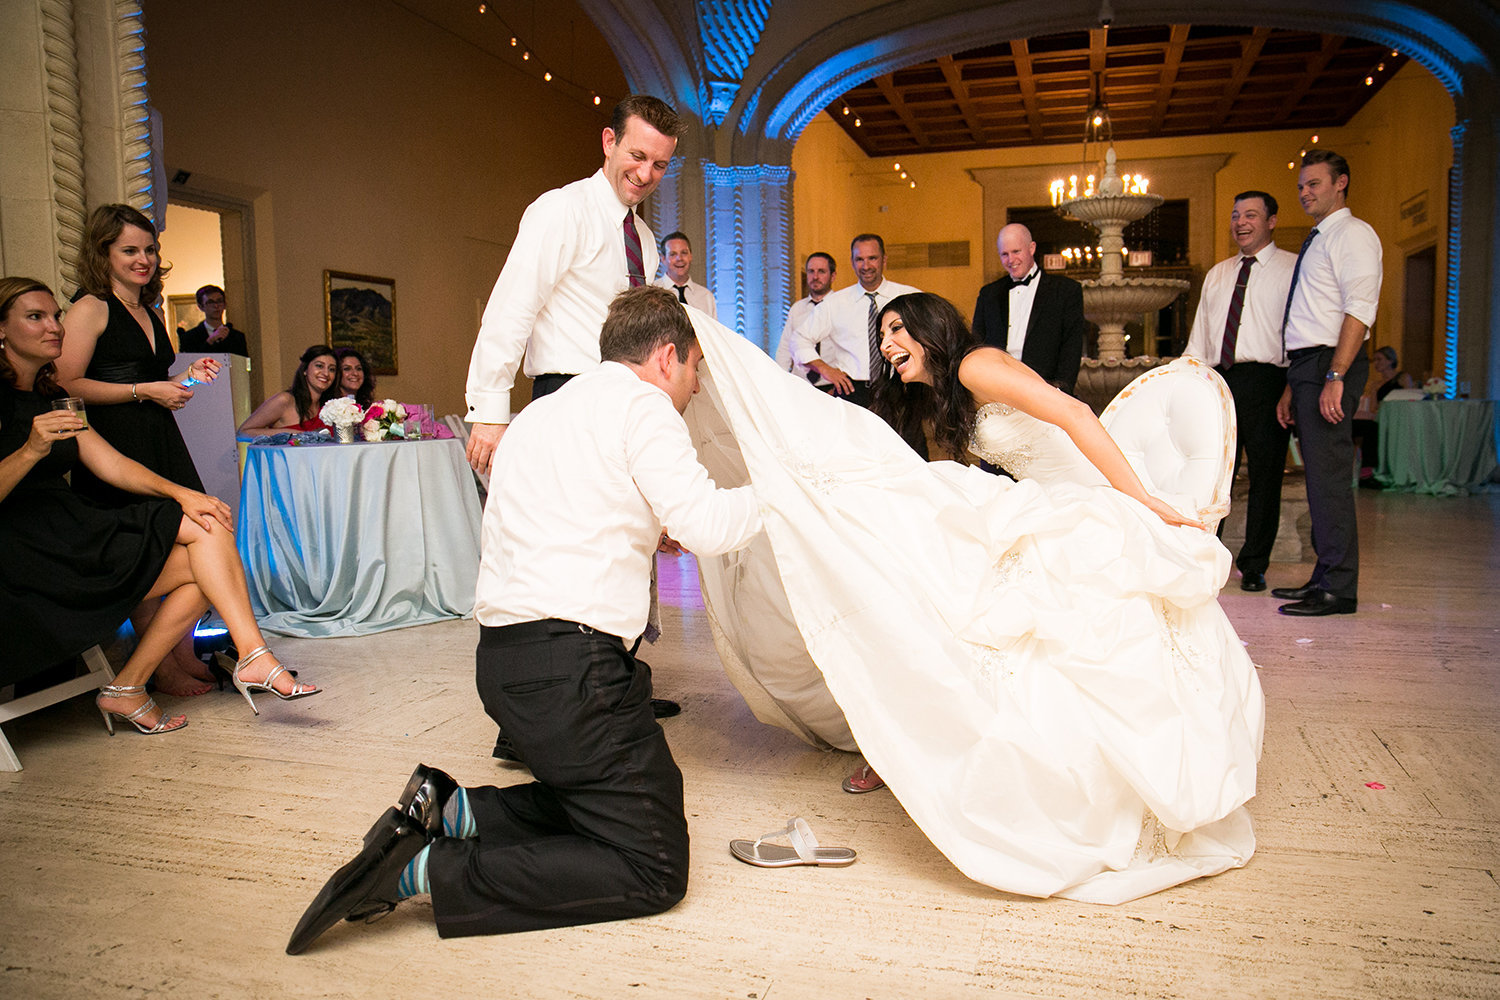 Hilarious moment during the garter removal